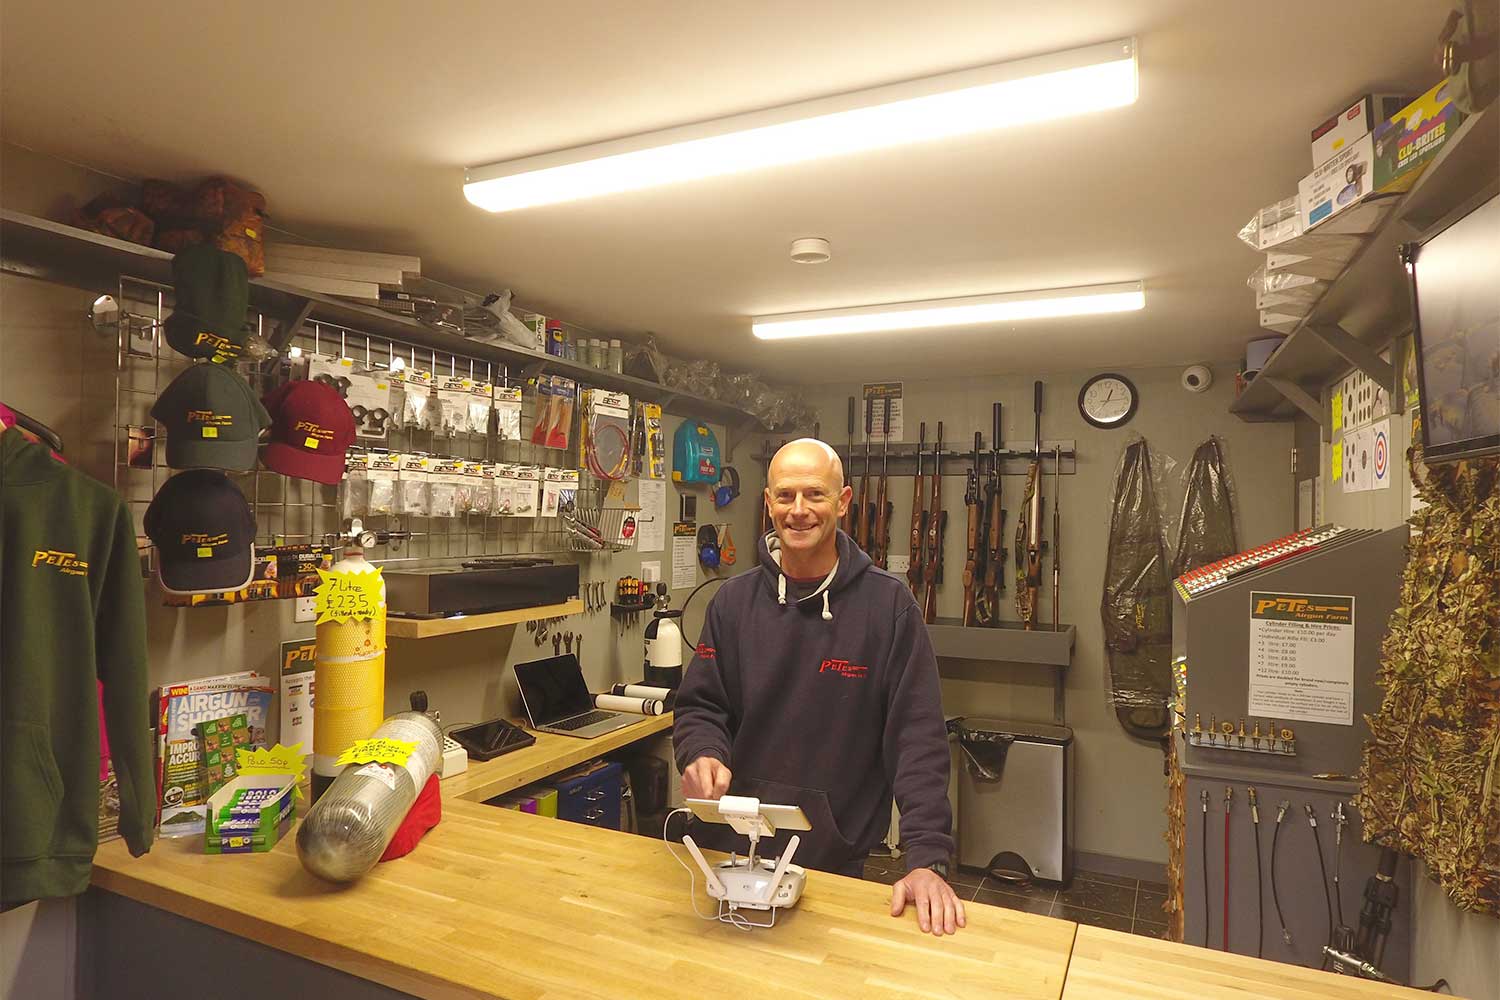 Pete in the shop. Looking cheerful!